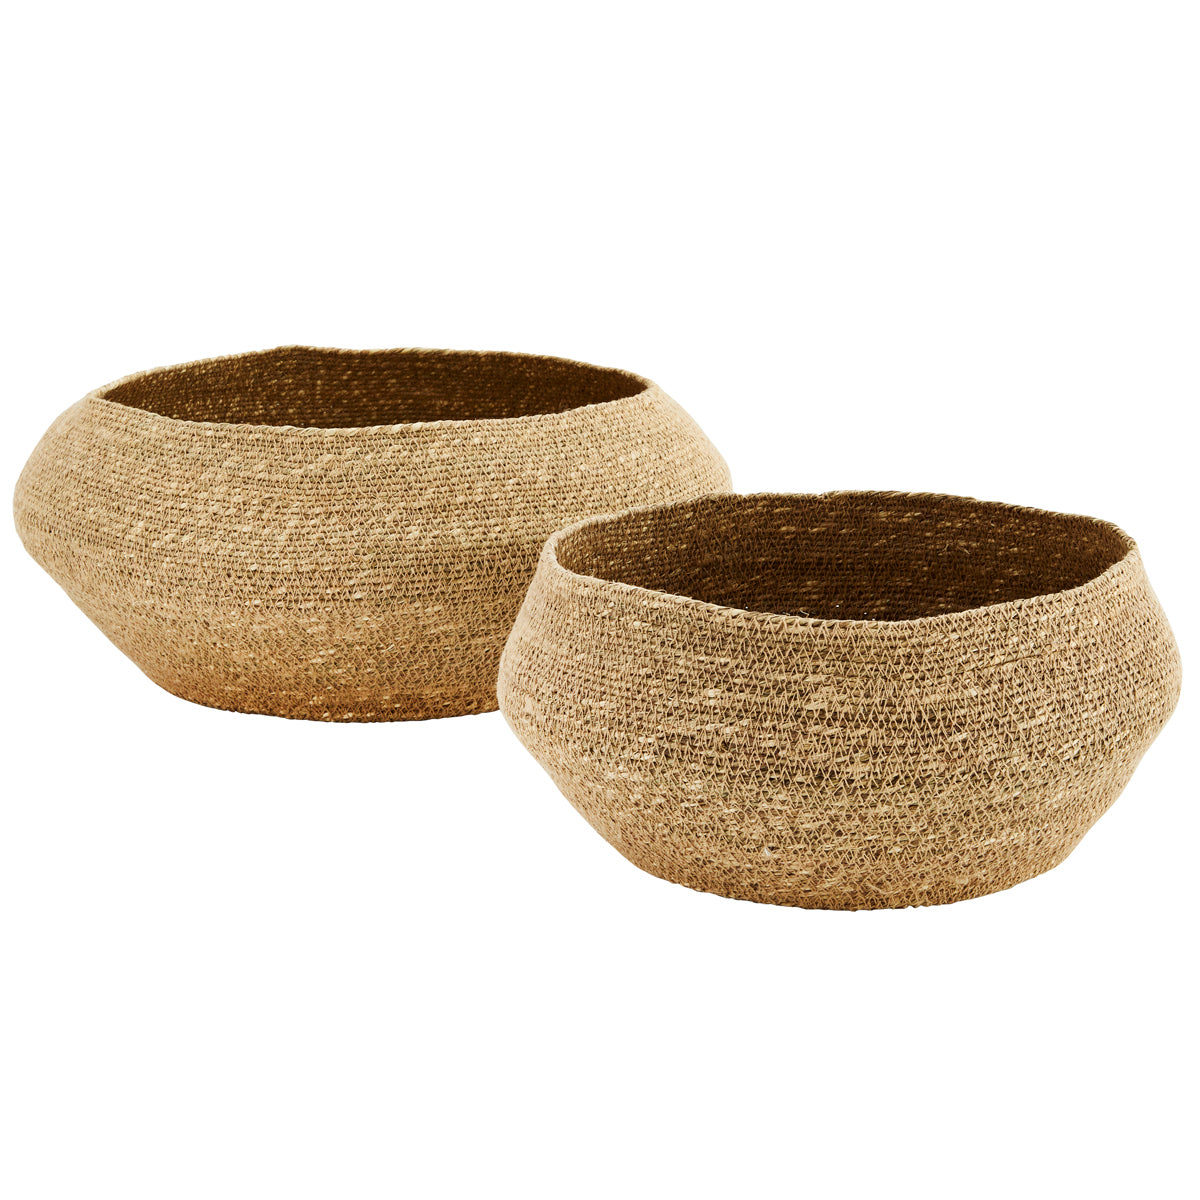 madam stoltz Seagrass baskets With Stitching set of two